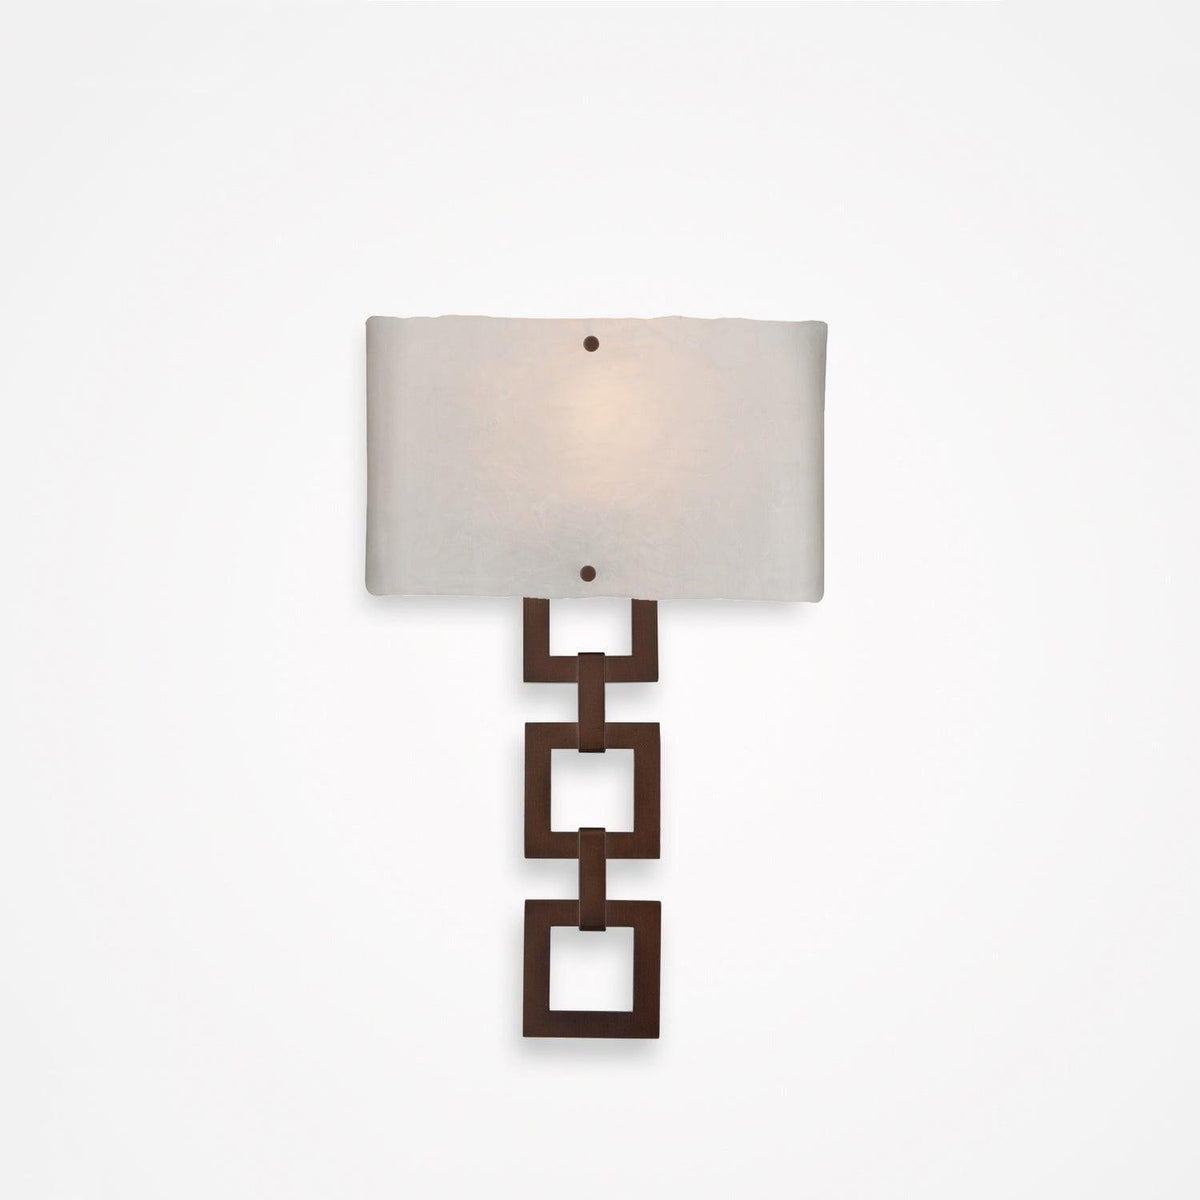 Hammerton Studio - Carlyle Square Link Cover Sconce - CSB0033-0B-RB-FG-E2 | Montreal Lighting & Hardware